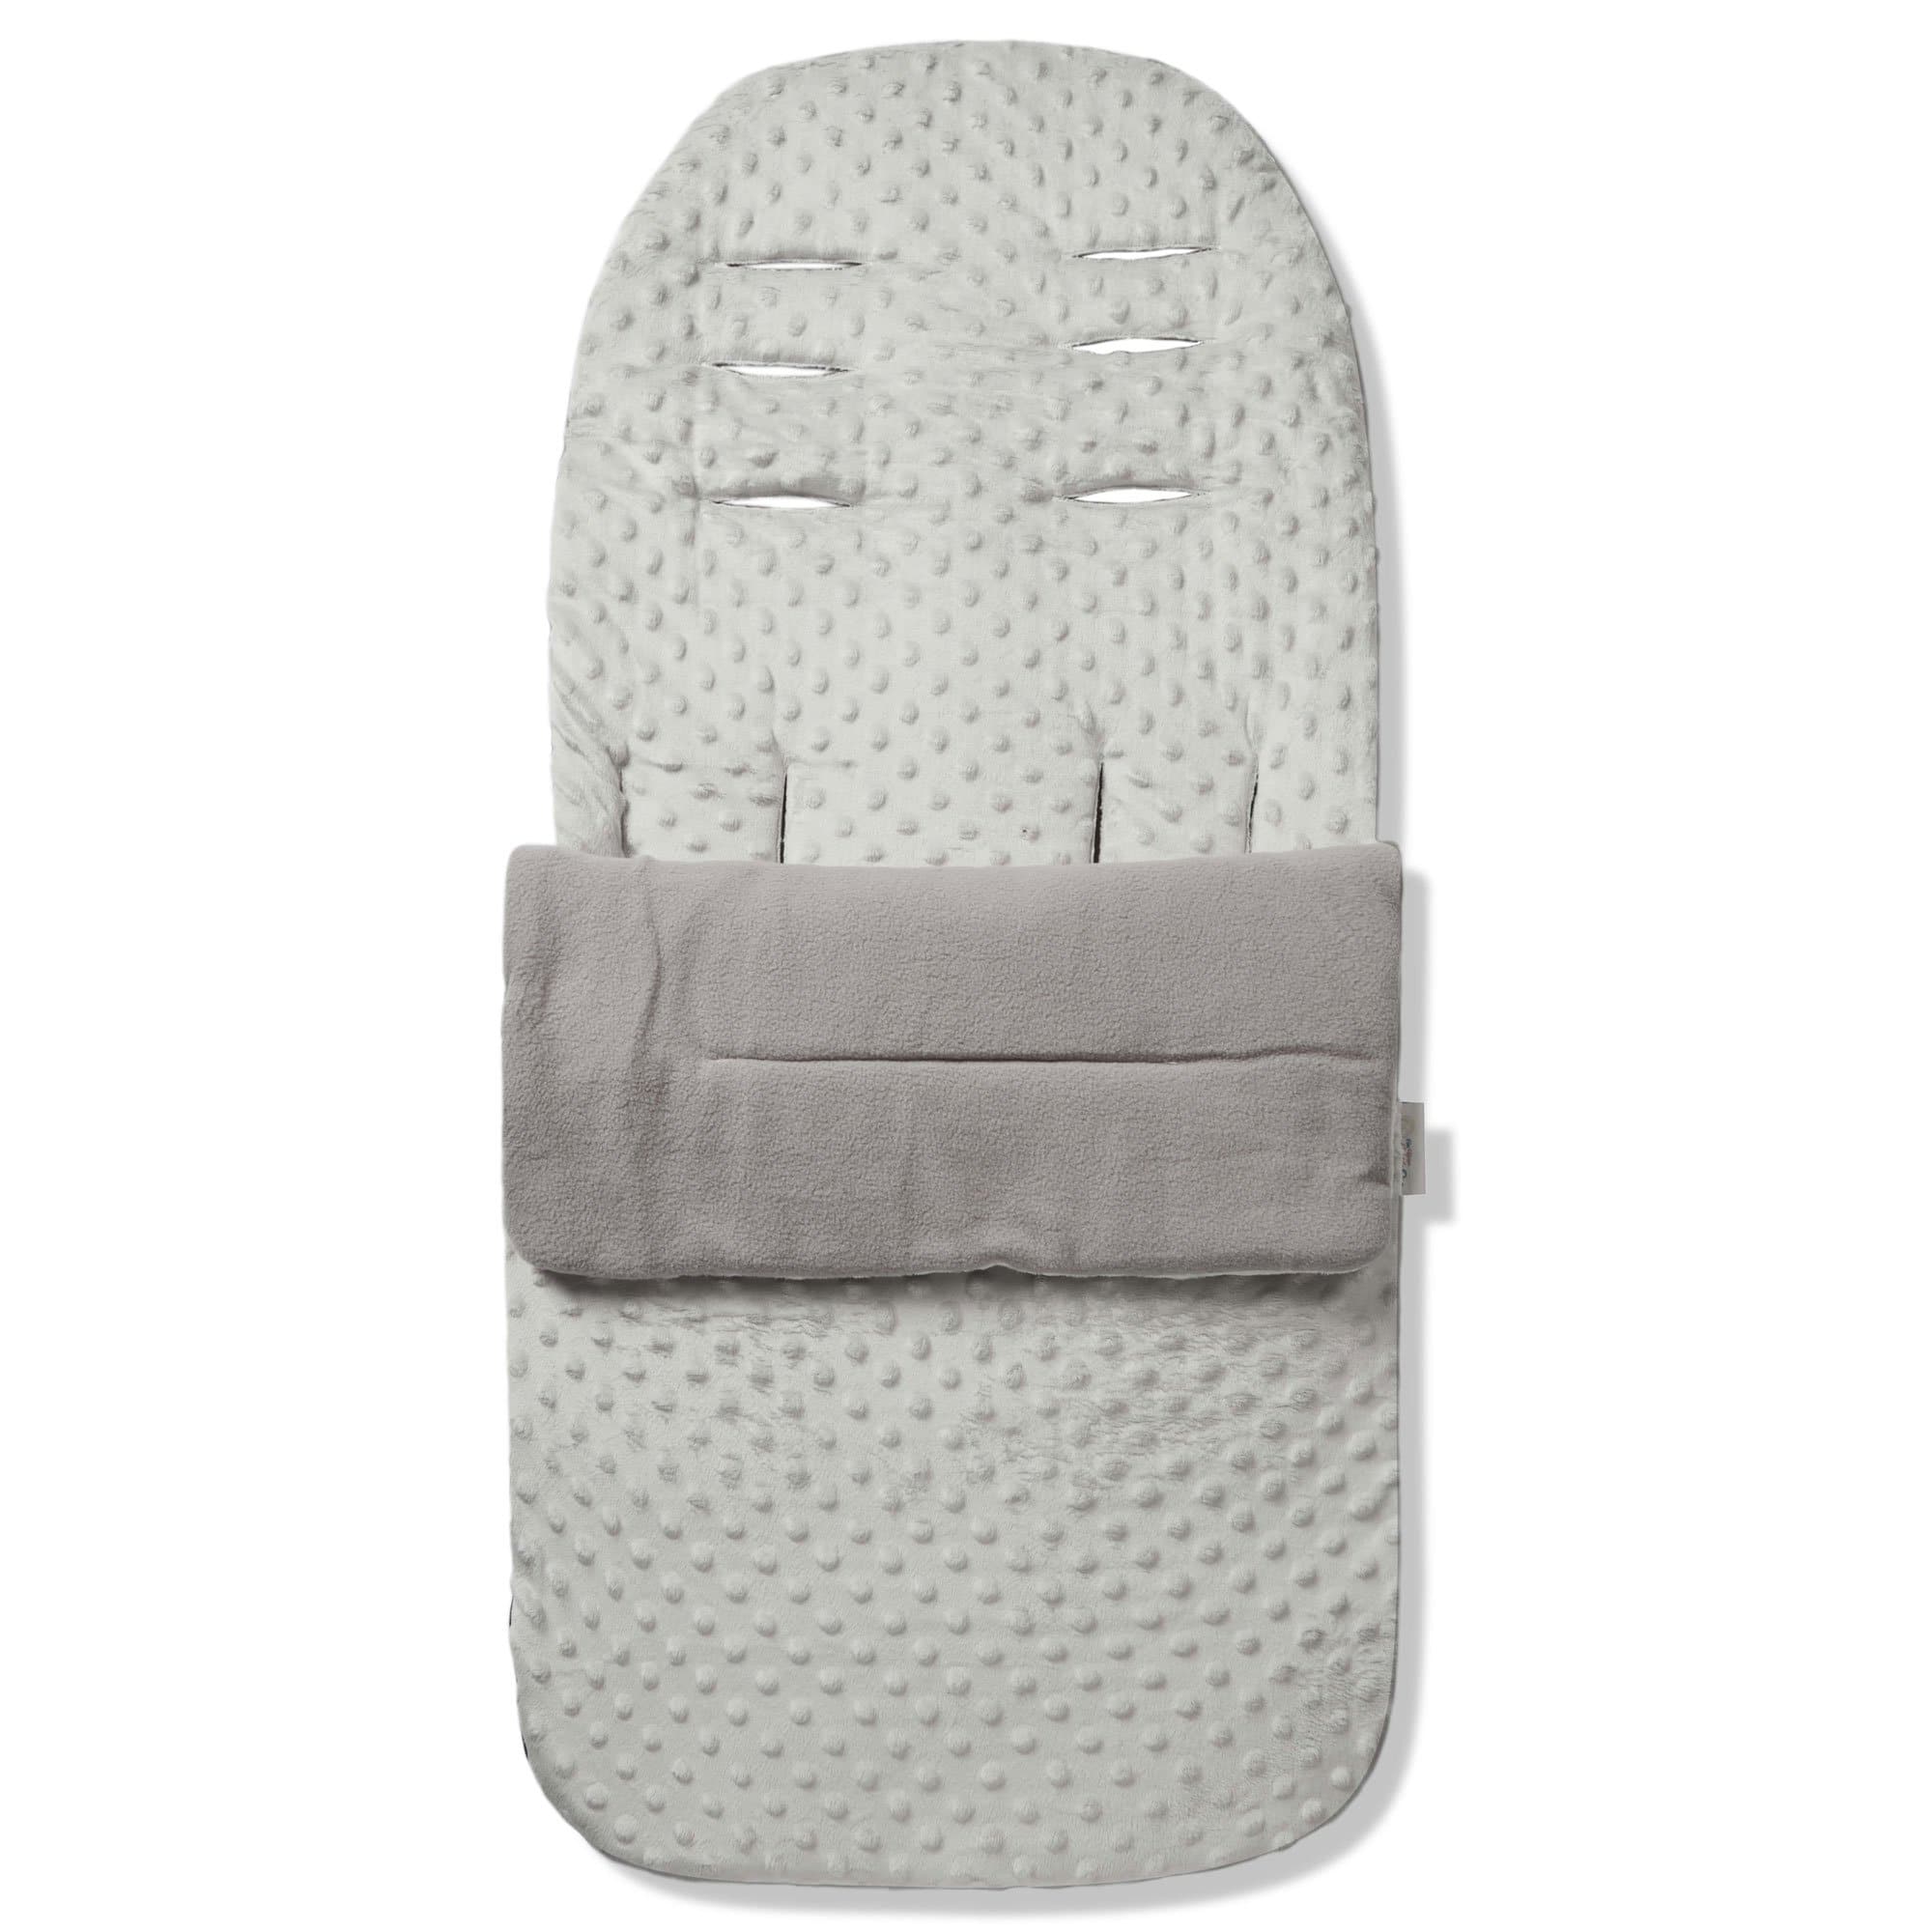 Dimple Footmuff / Cosy Toes Compatible with Safety 1st - For Your Little One